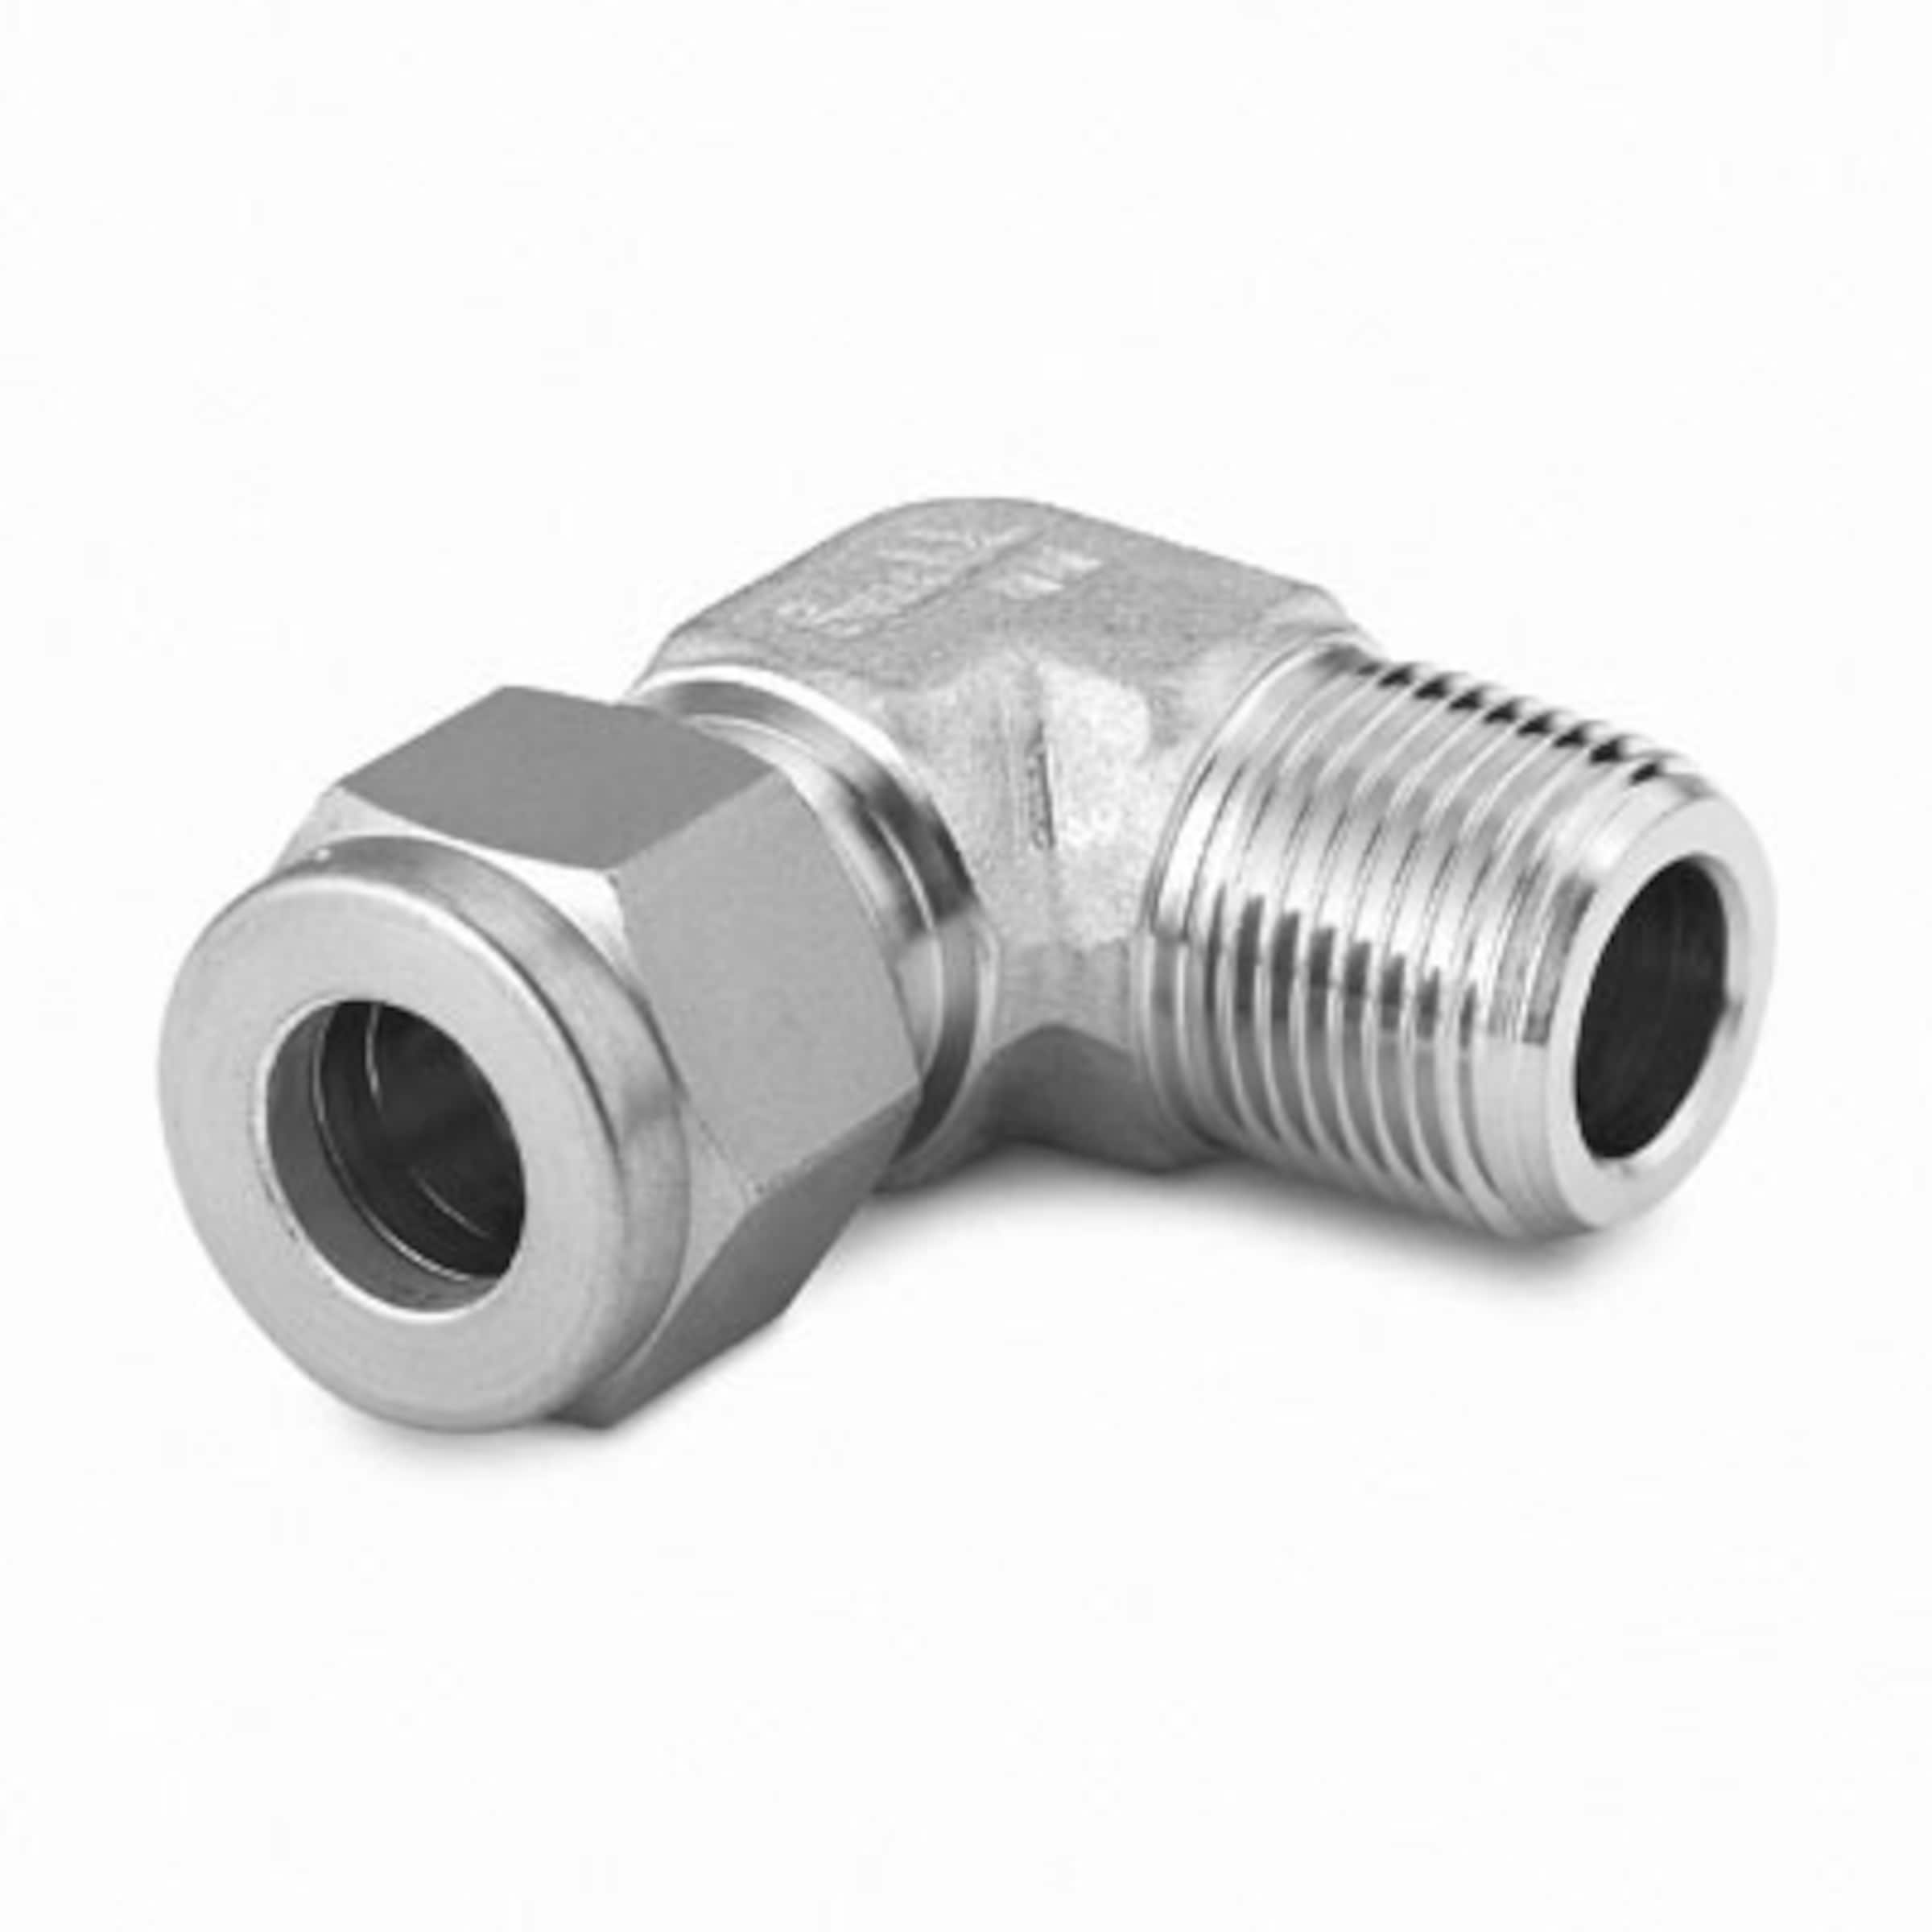 Stainless Steel Swagelok Tube Fitting, Male Elbow, 12 mm Tube OD x 1/2 in.  Male NPT, Male Connectors, Tube Fittings and Adapters, Fittings, All  Products